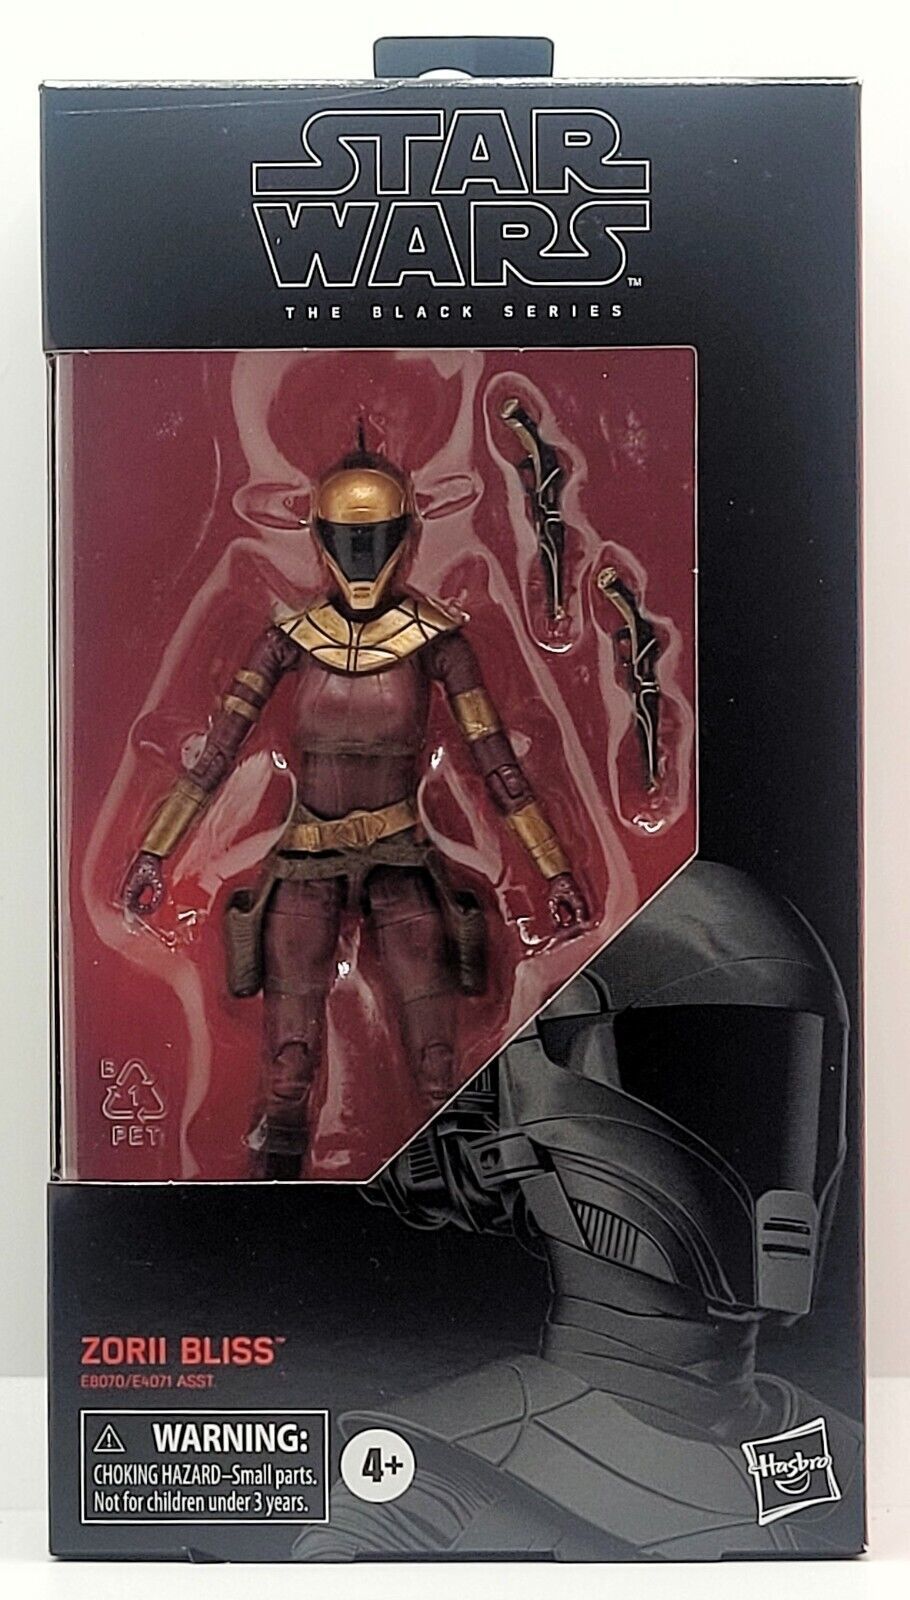 Primary image for Star Wars Black Series Zorii BlissAction Figure - SW11